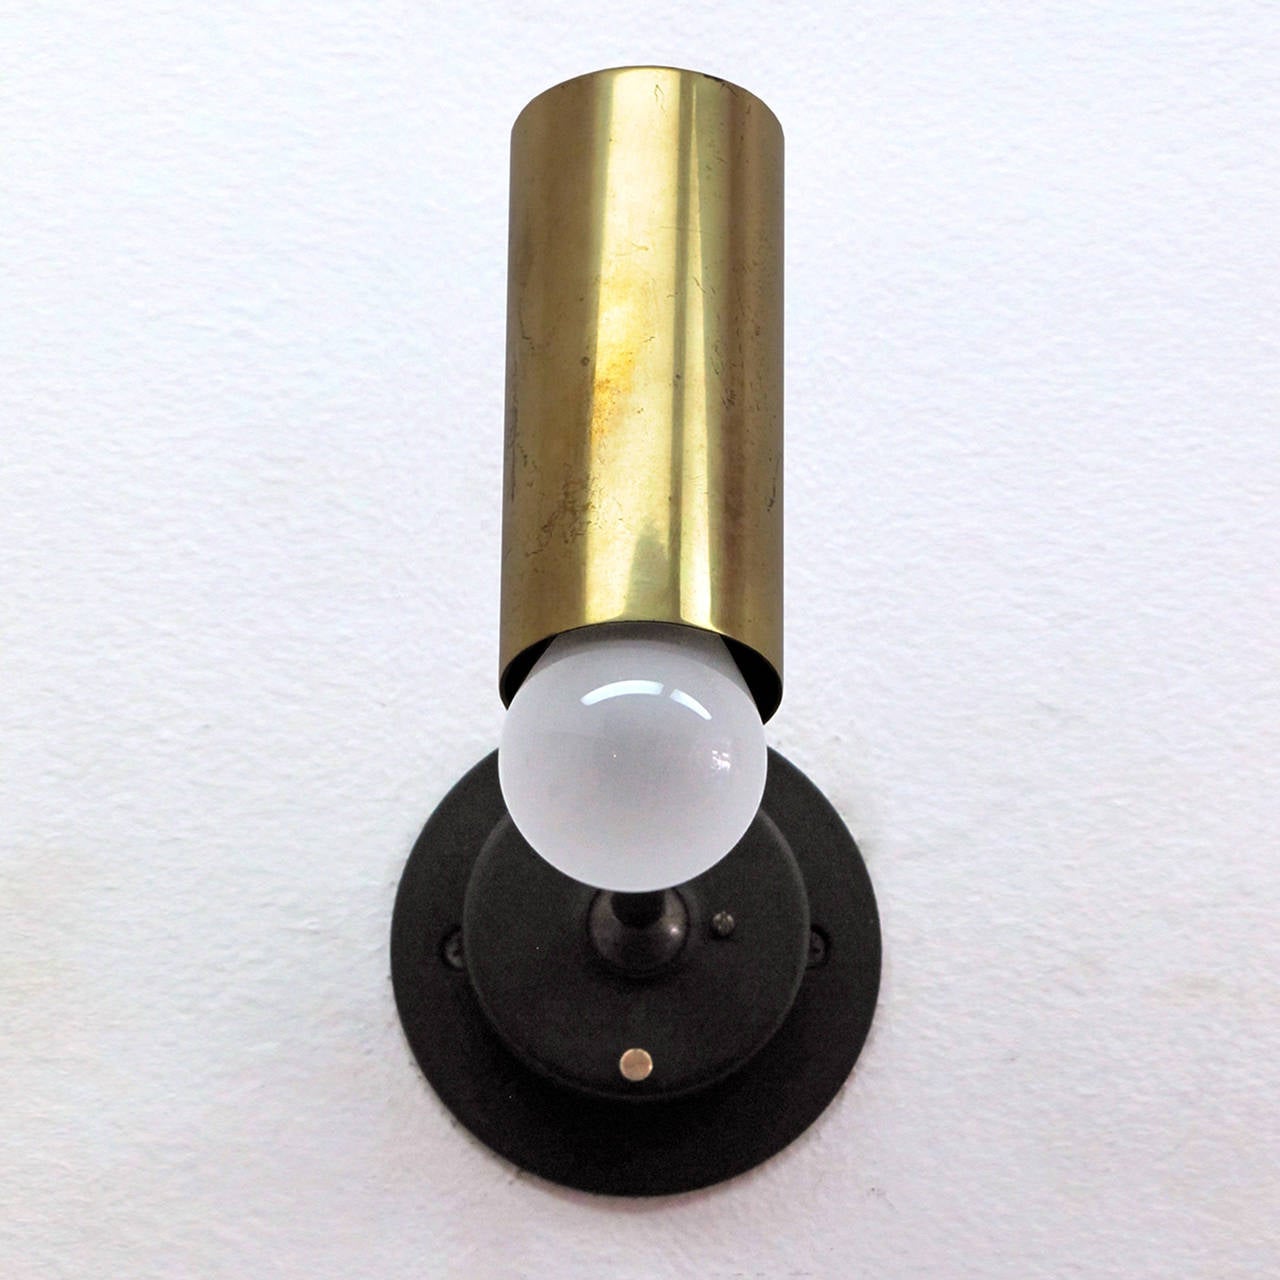 Elegant brass bodied adjustable sconces, swivel joint at the cylinders, ball joint at the backplate, circle of perforations at top of cylinders, shade extensions available (pic 4&9), custom back plates for US electrical use.